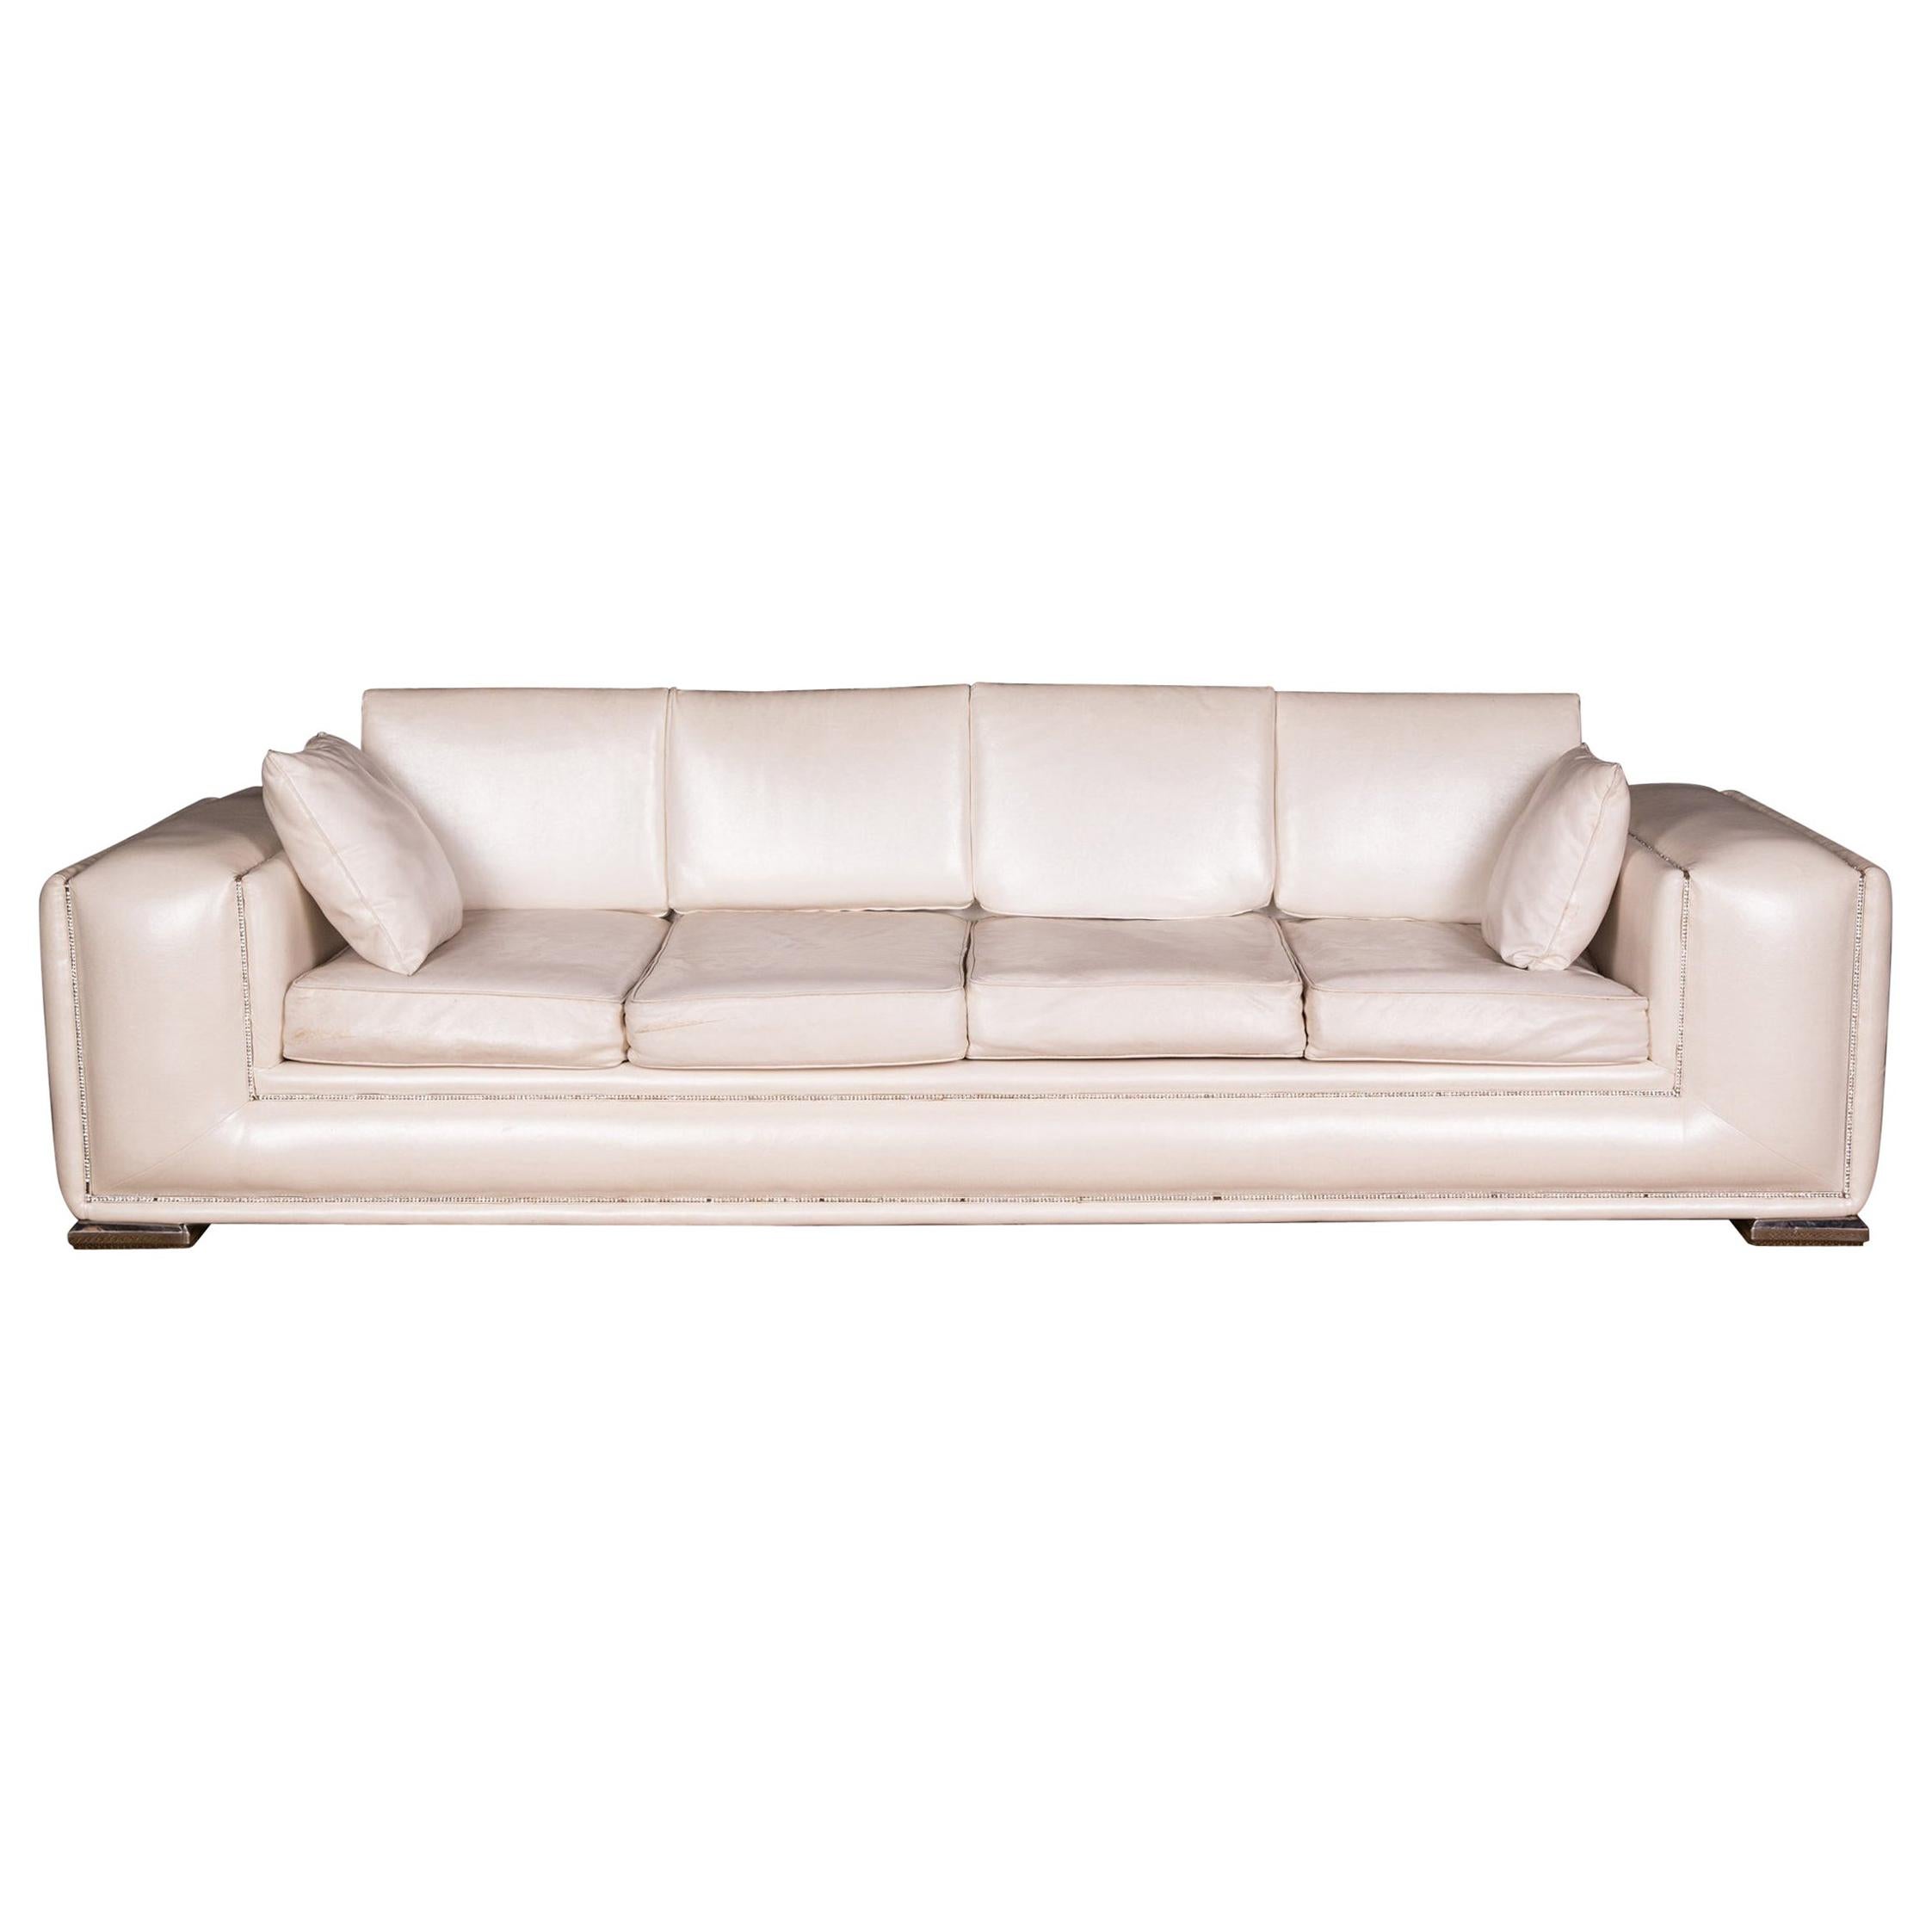 Designer Sofa Four-Seat with Swarovski Stones Rhinestones For Sale at  1stDibs | couch with rhinestones, swarovski sofa, grey couch with  rhinestones